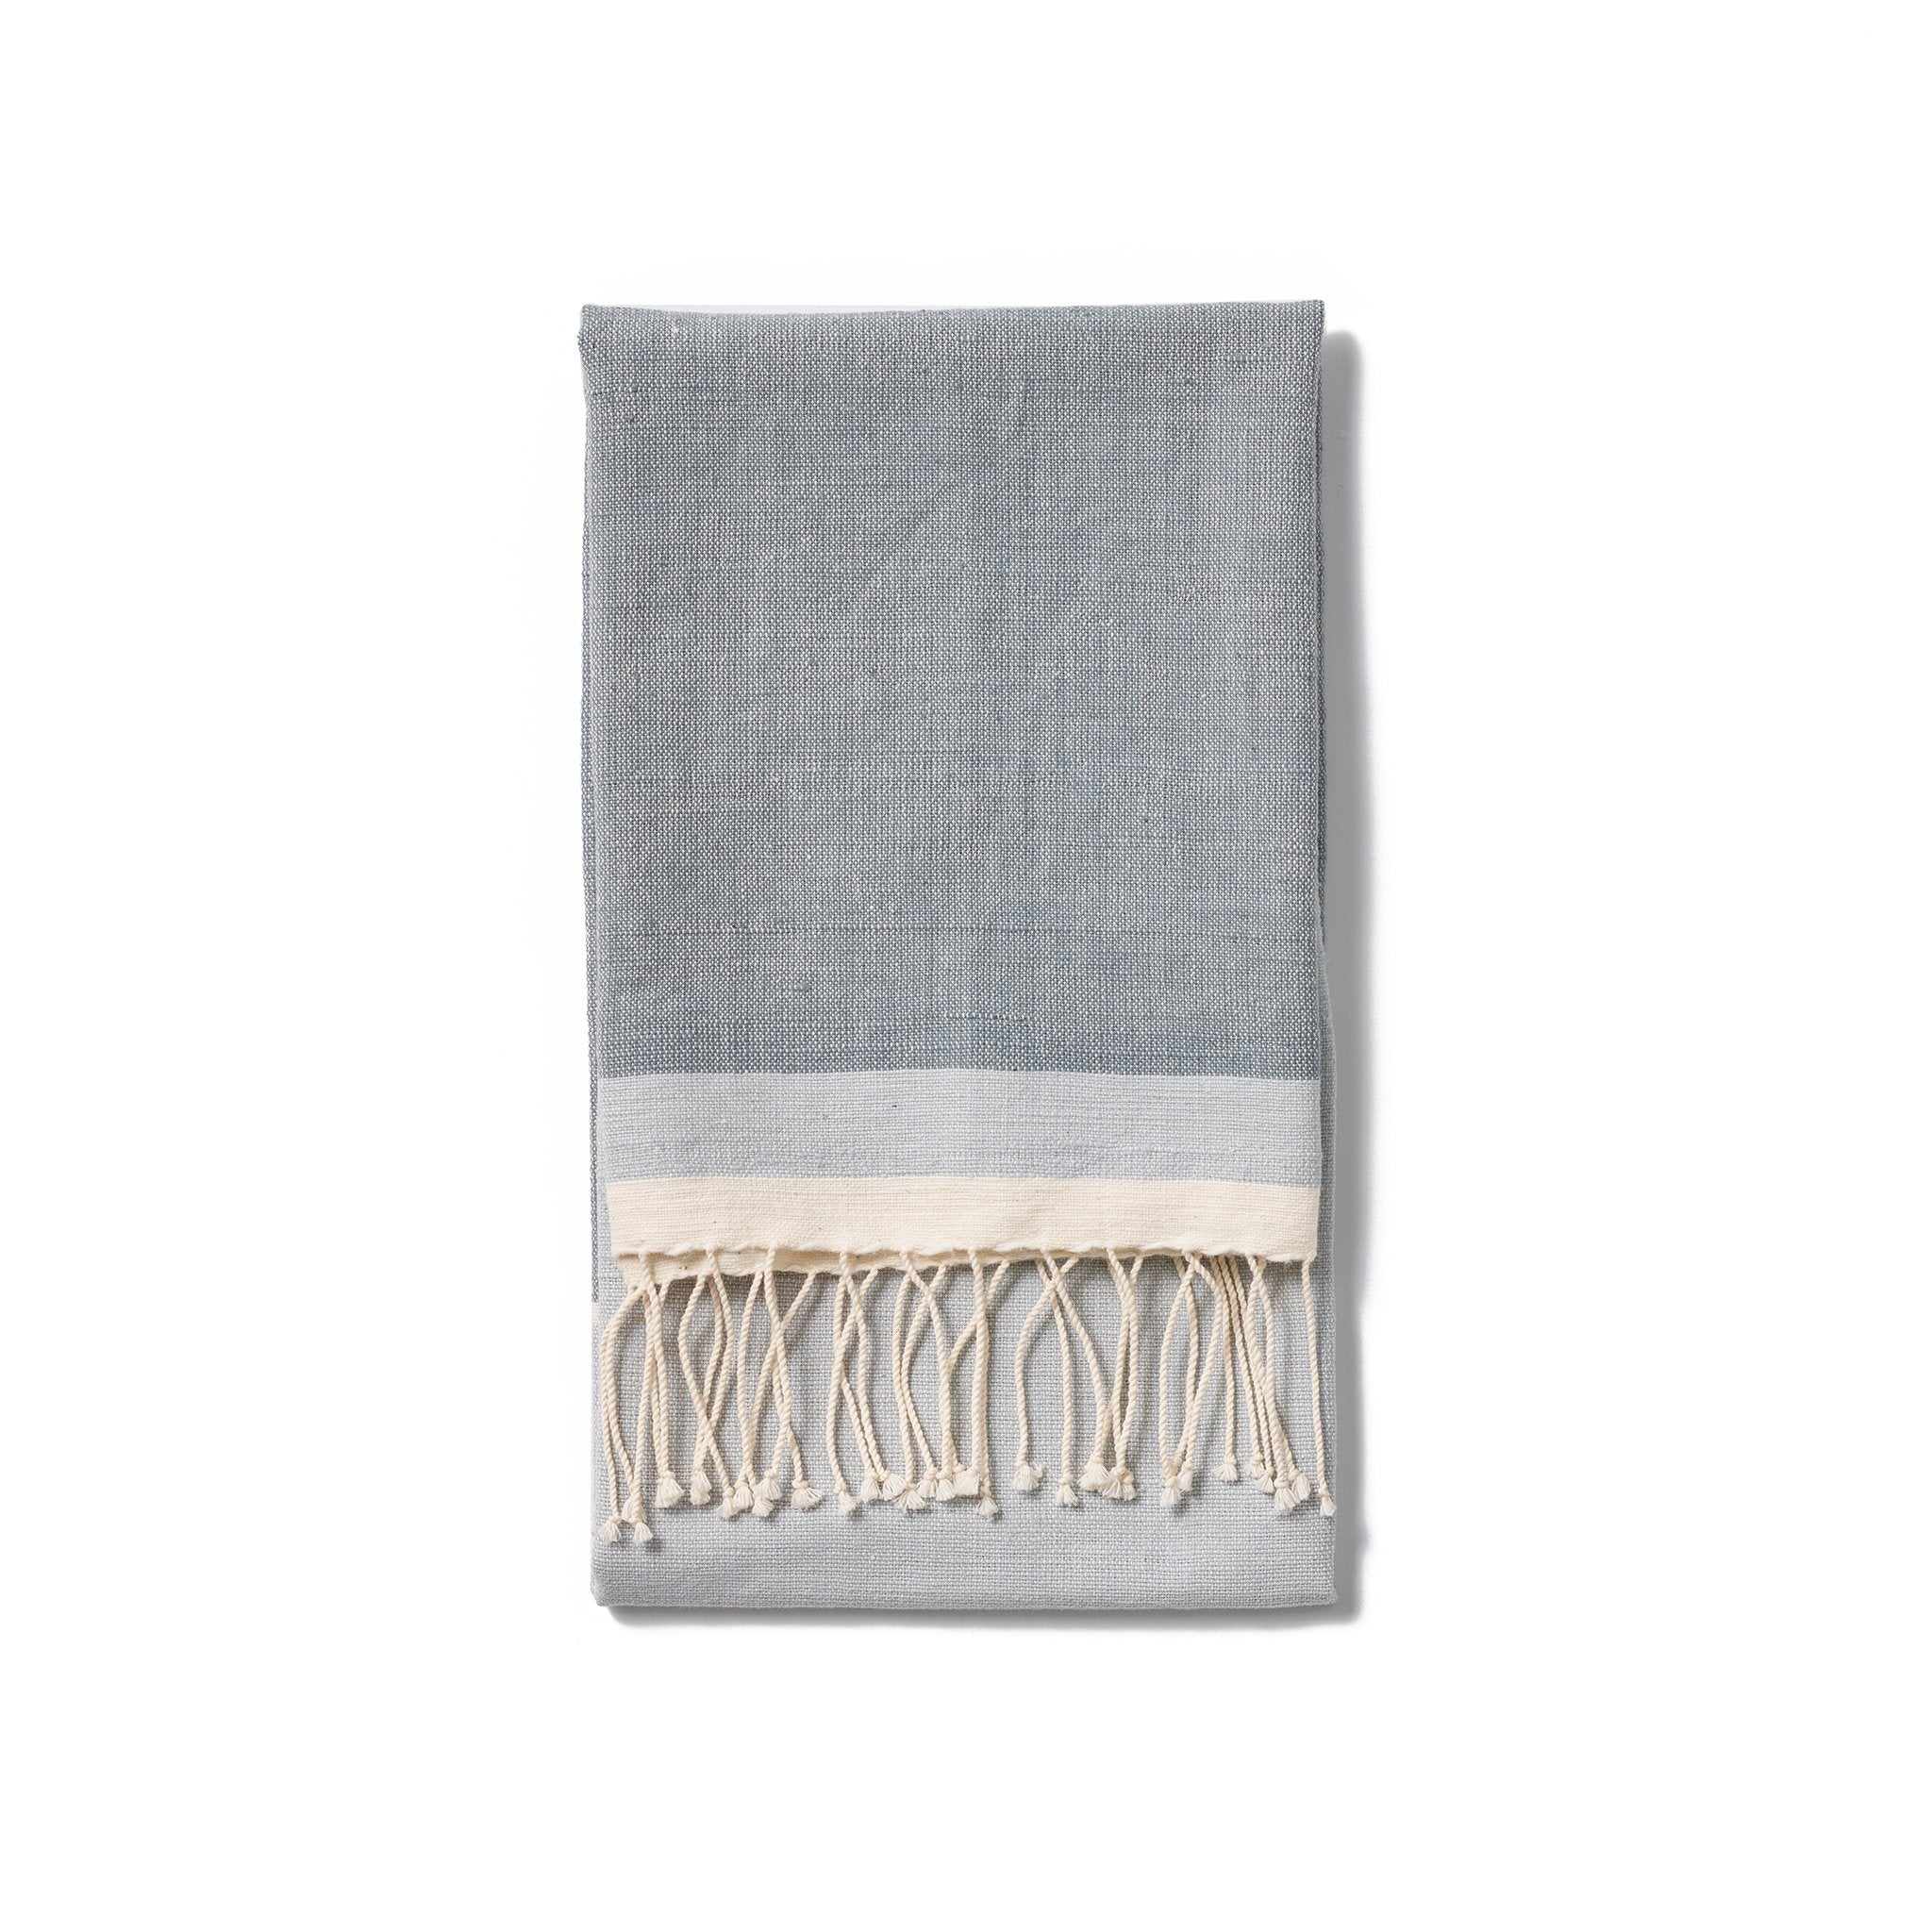 A traditional and timeless hand towel woven by hand from 100% Ethiopian cotton, dyed in small batches, and fringed by hand.